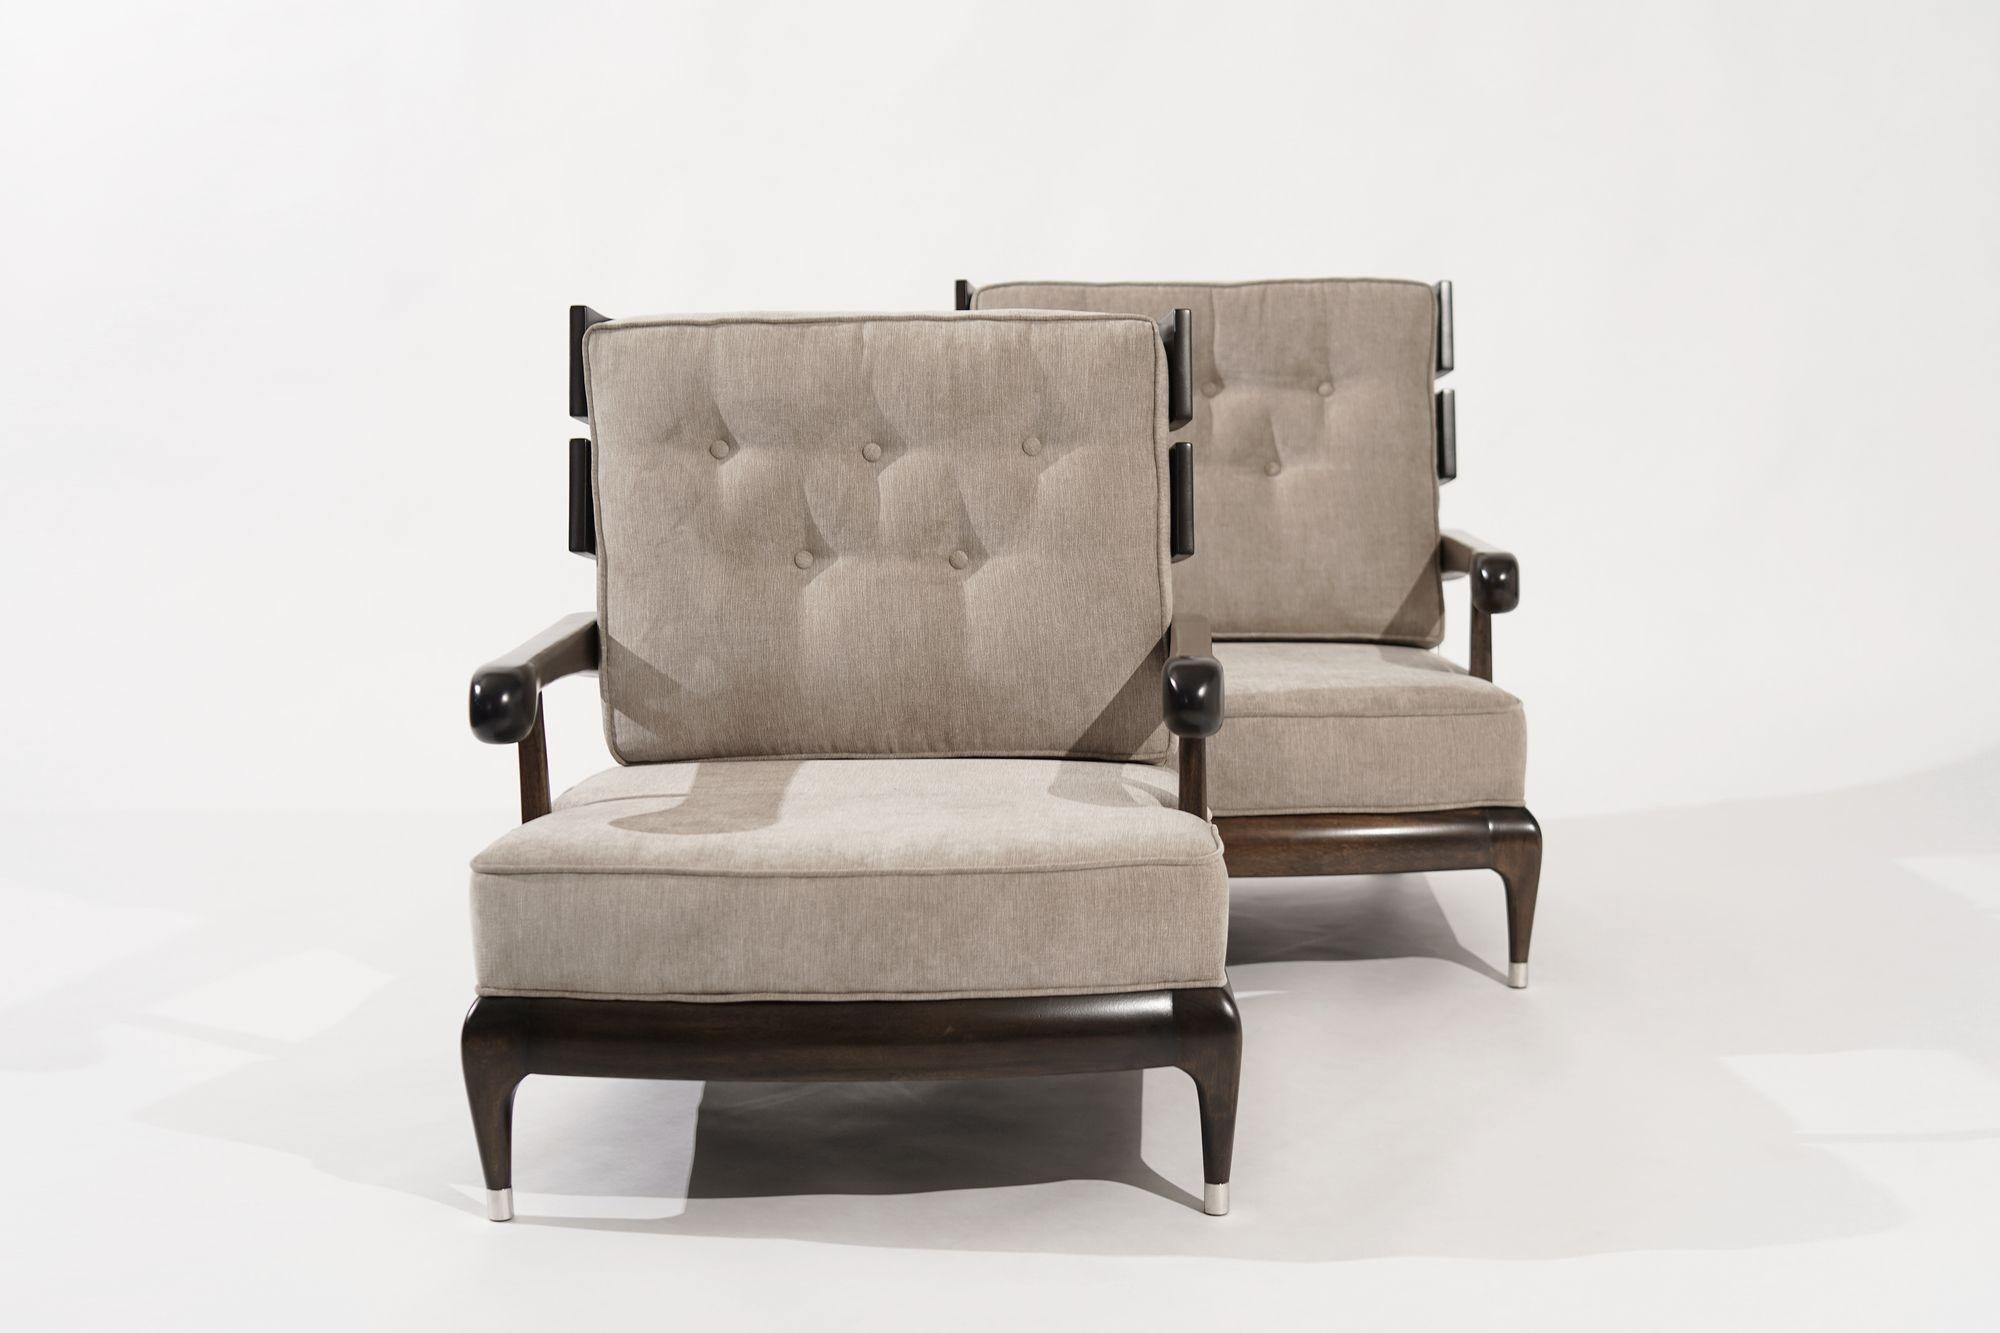 Widdicomb 1950s Lounge Chairs, meticulously restored by Stamford Modern to embody the quintessence of mid-century design. These chairs are an aesthetic delight, seamlessly blending a striking slate backrest with a plush, low-profile seating for an